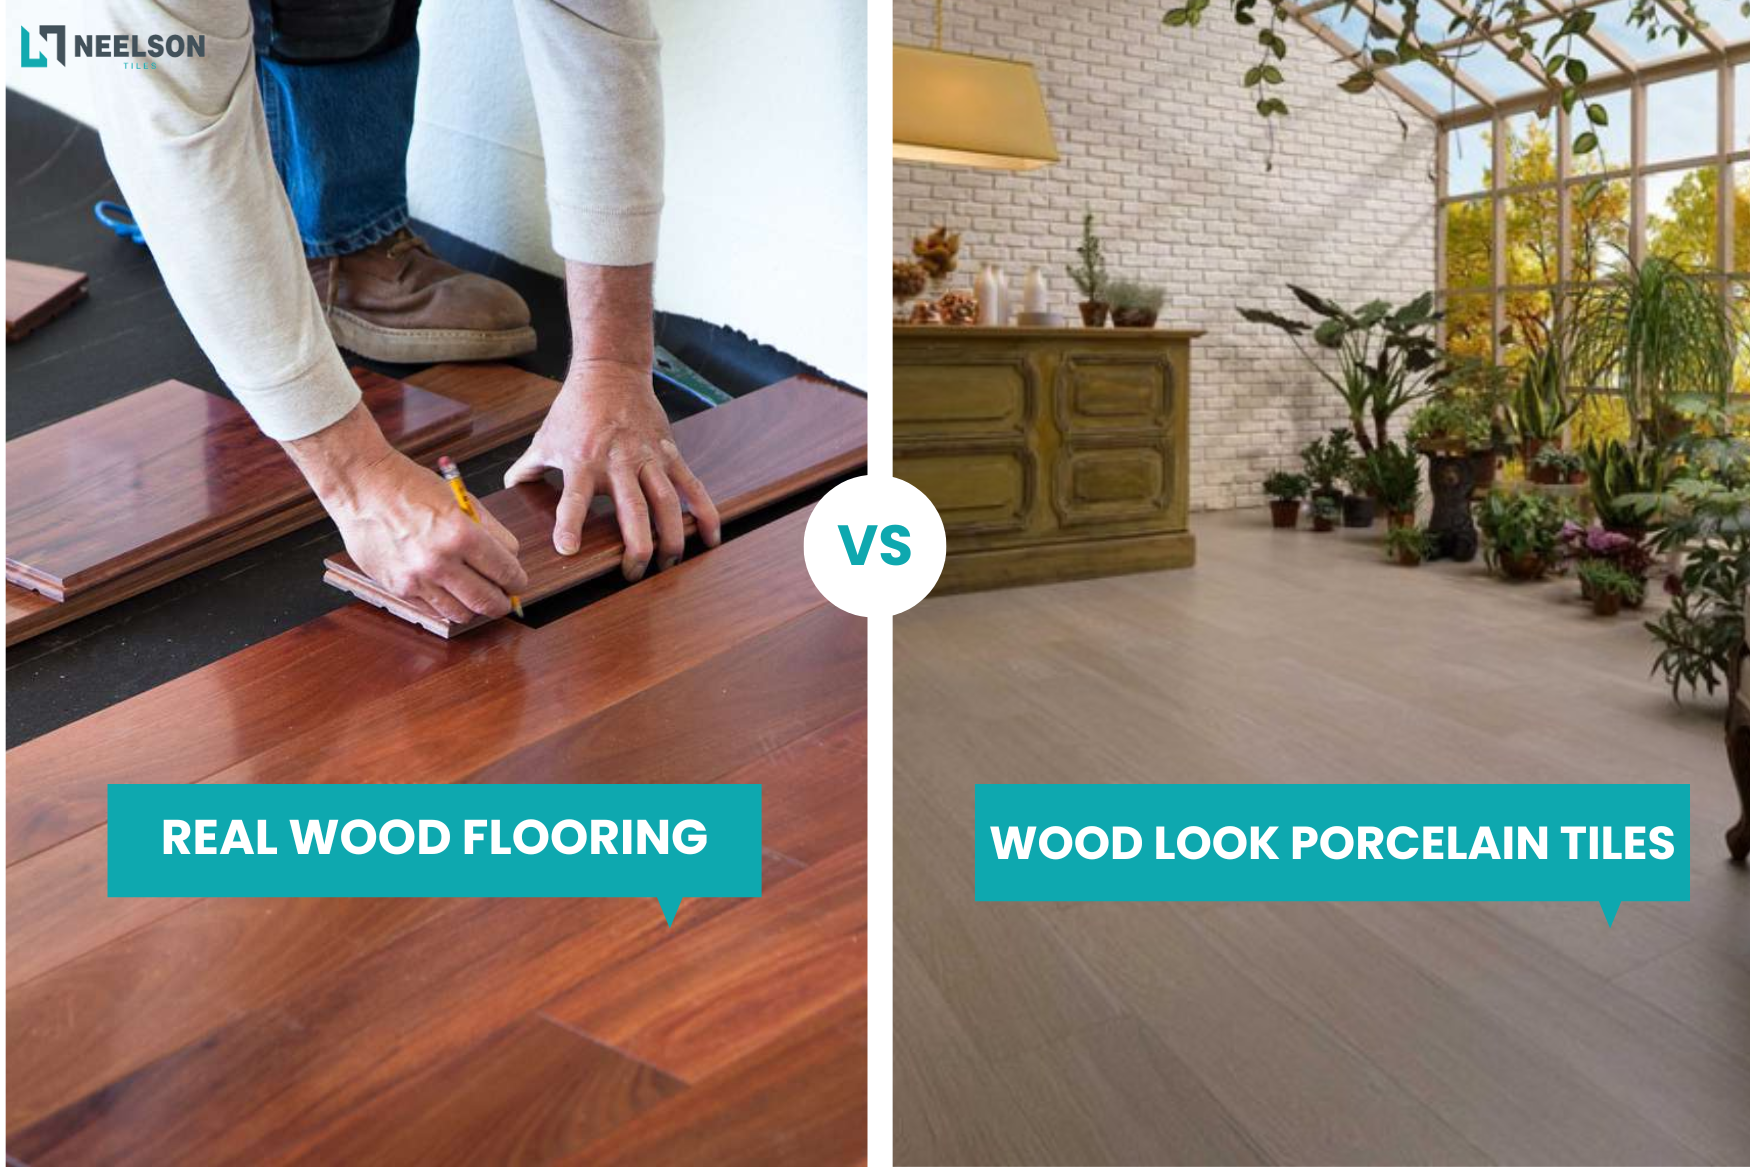 Wood Look Porcelain Tiles vs. Real Wood Flooring: Making the Right Choice for Your Space